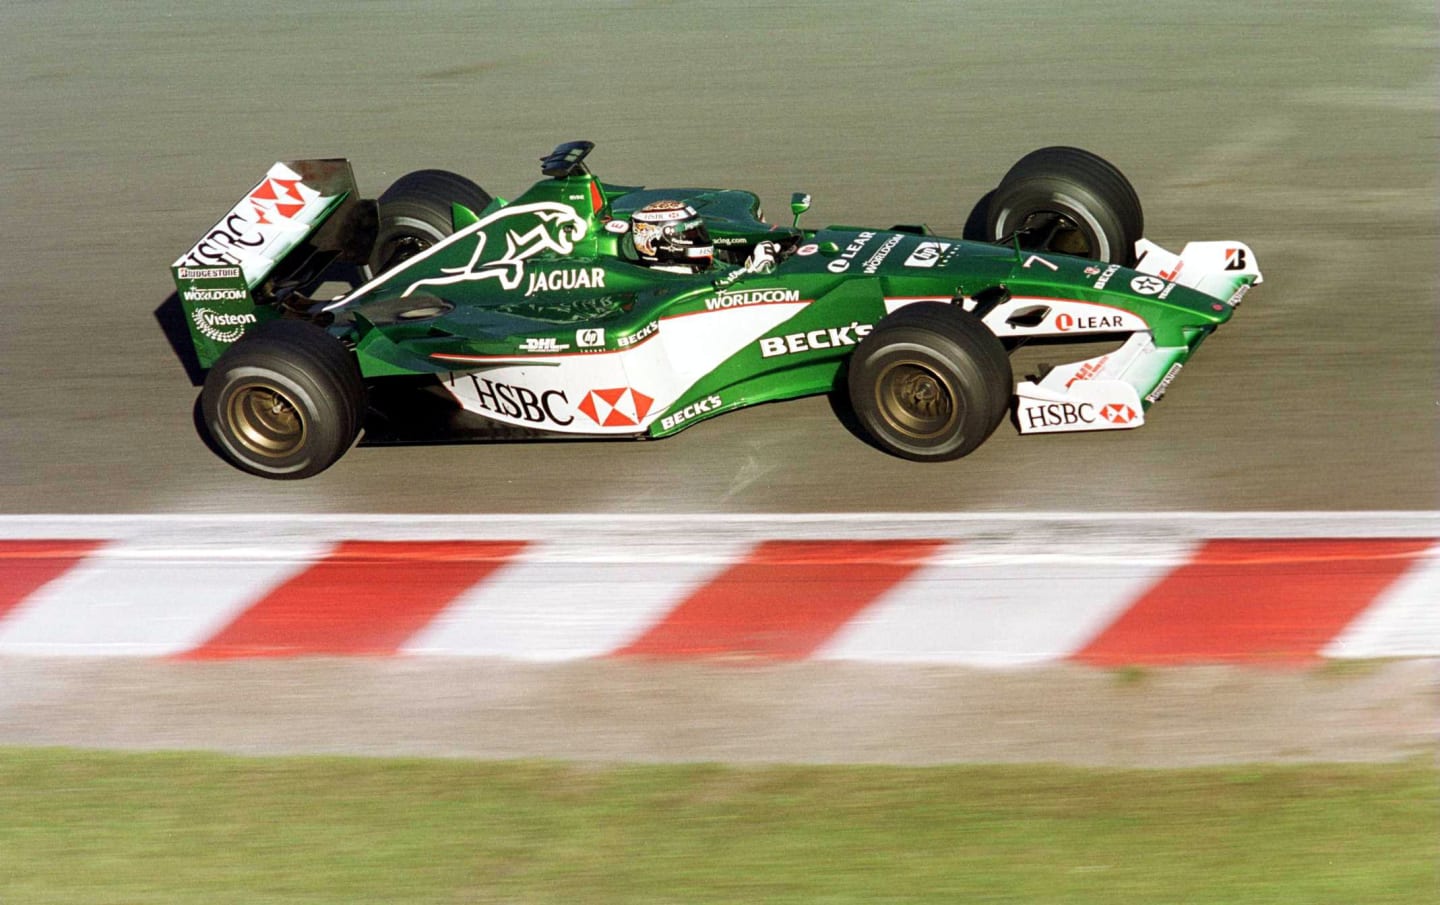 Eddie Irvine and Johnny Herbert began the season with two retirements each